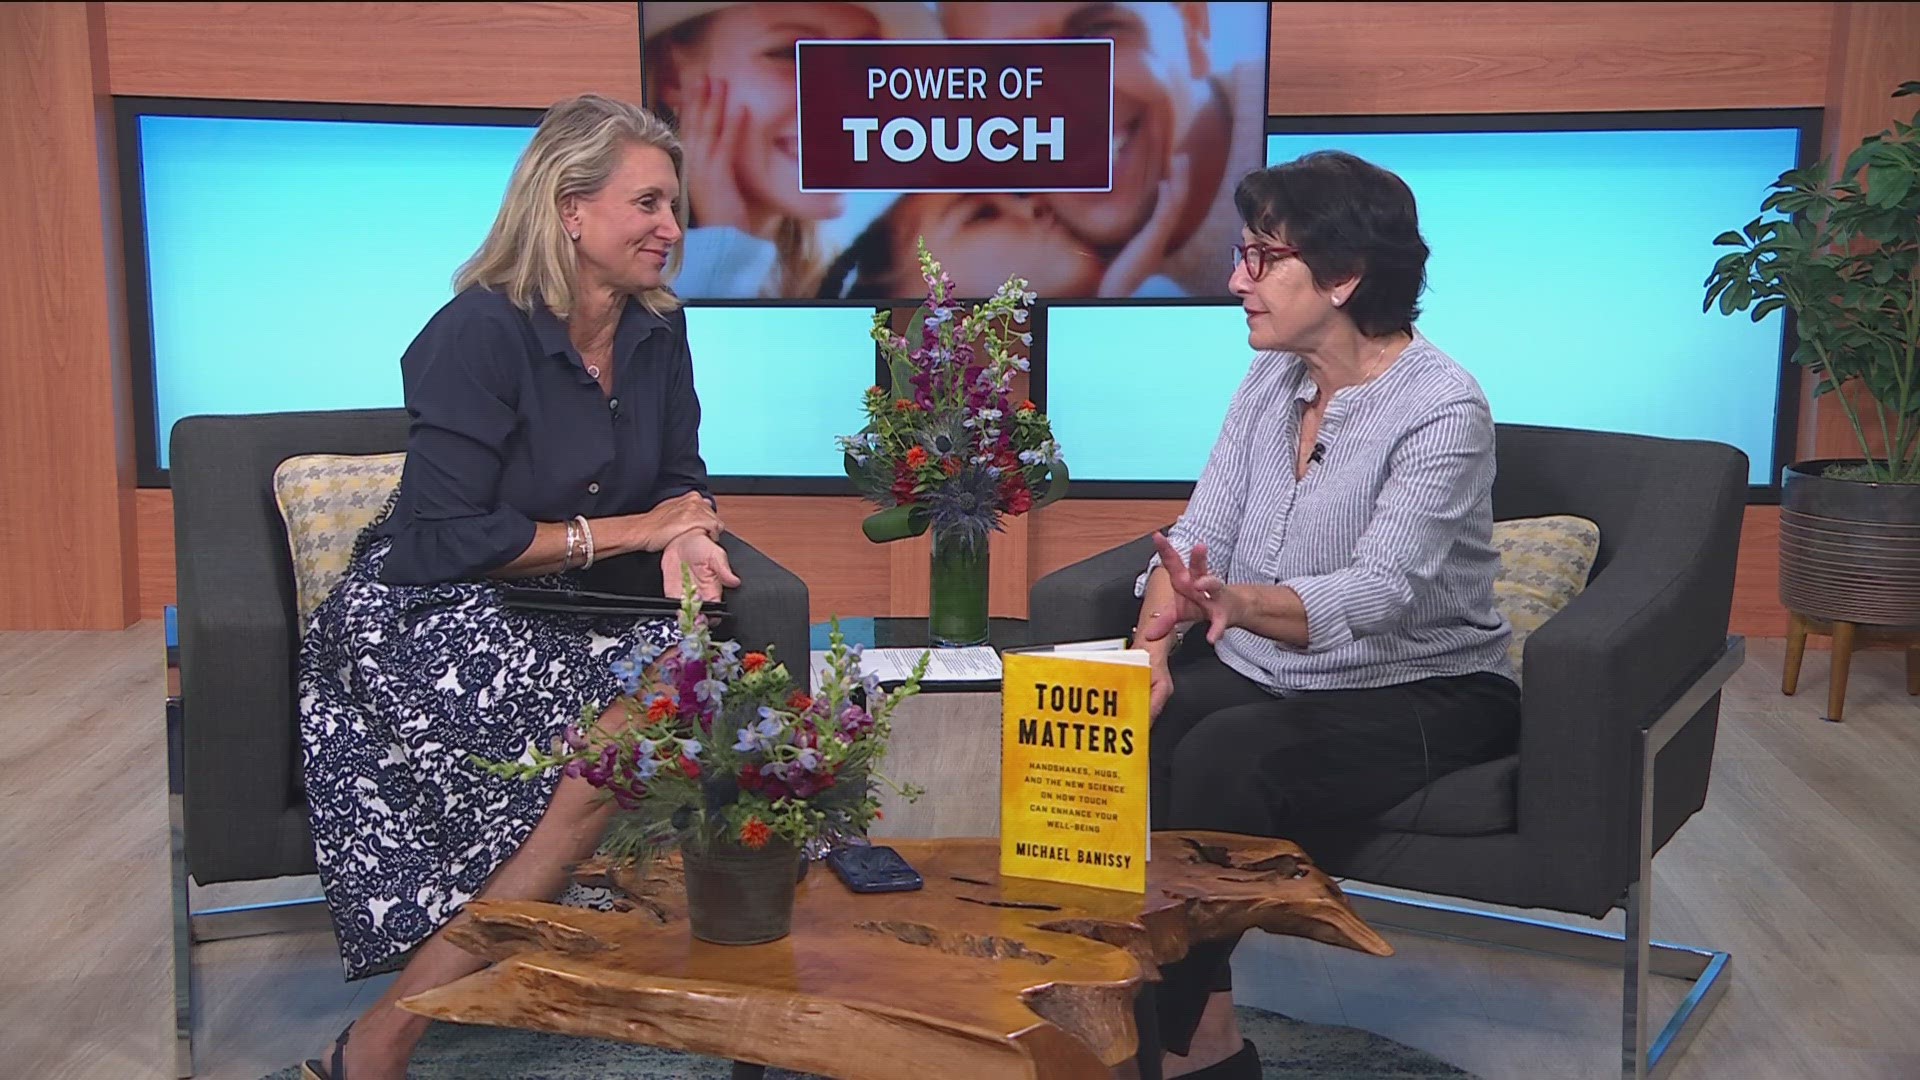 Developmental psychologist Dr. Marti Erickson shared tips to make sure you and your family are reaping the benefits of touch in your daily lives.